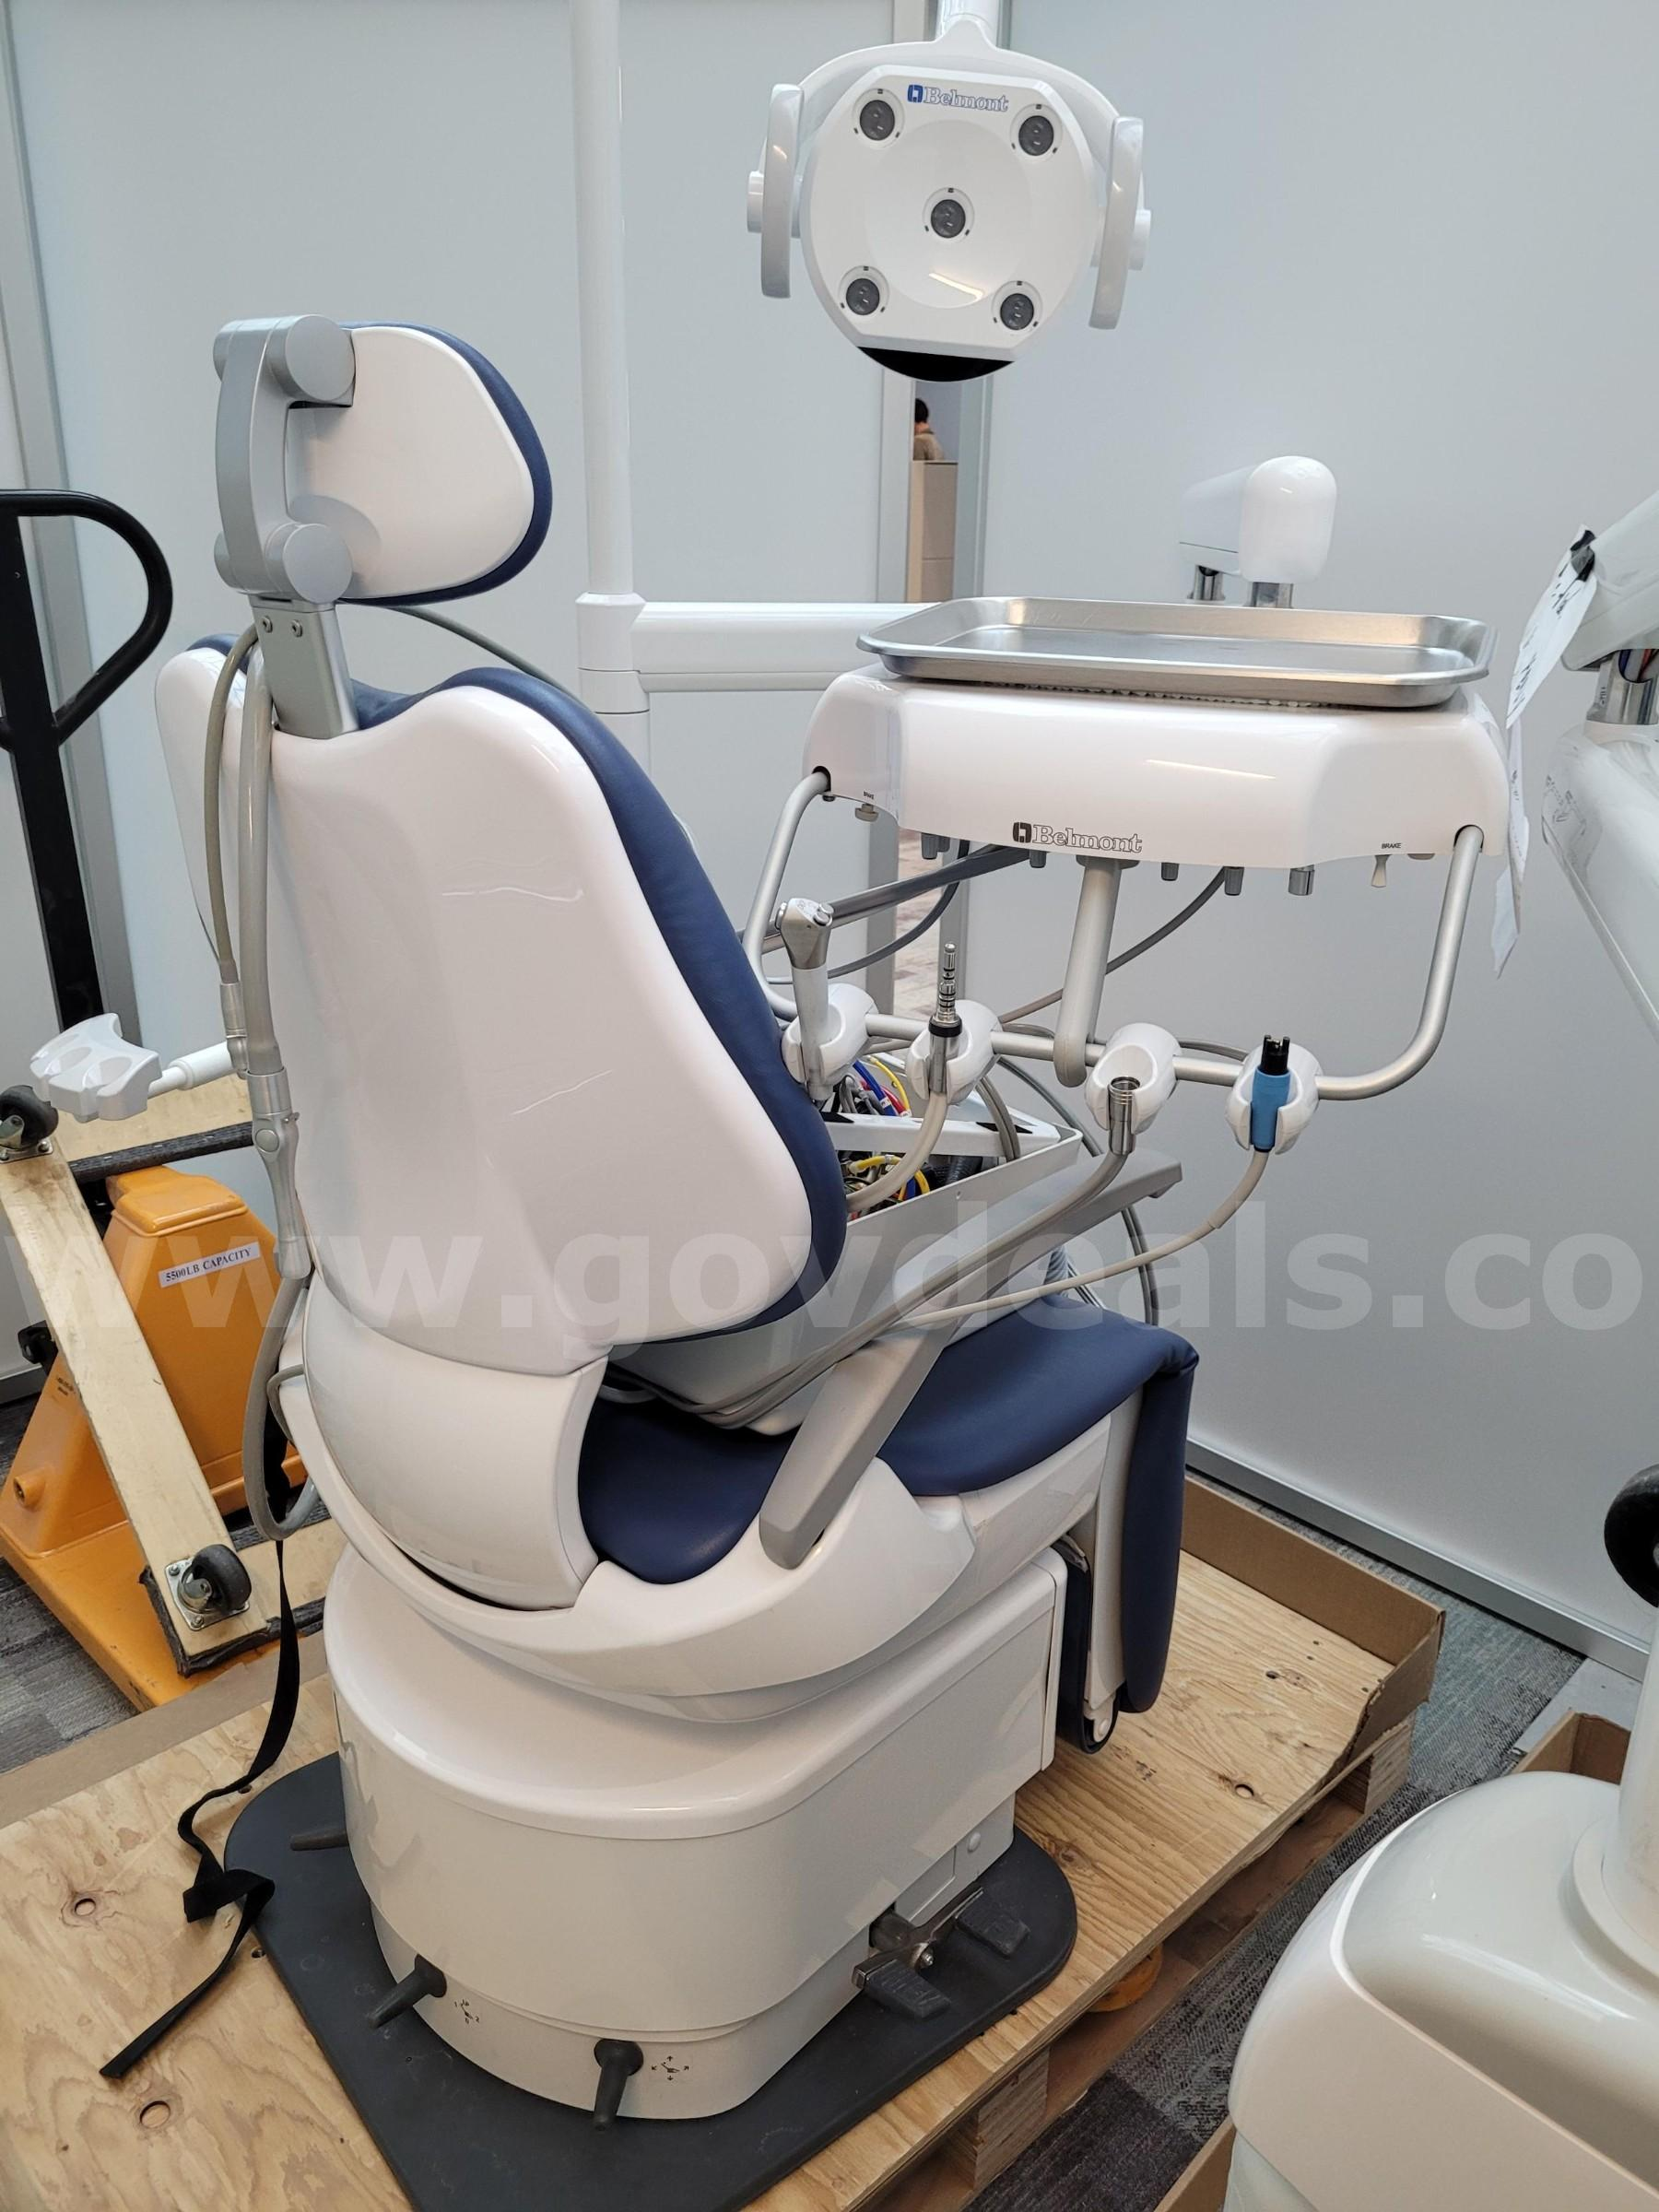 2019 Belmont Knee Break Dental Chair with Front Delivery